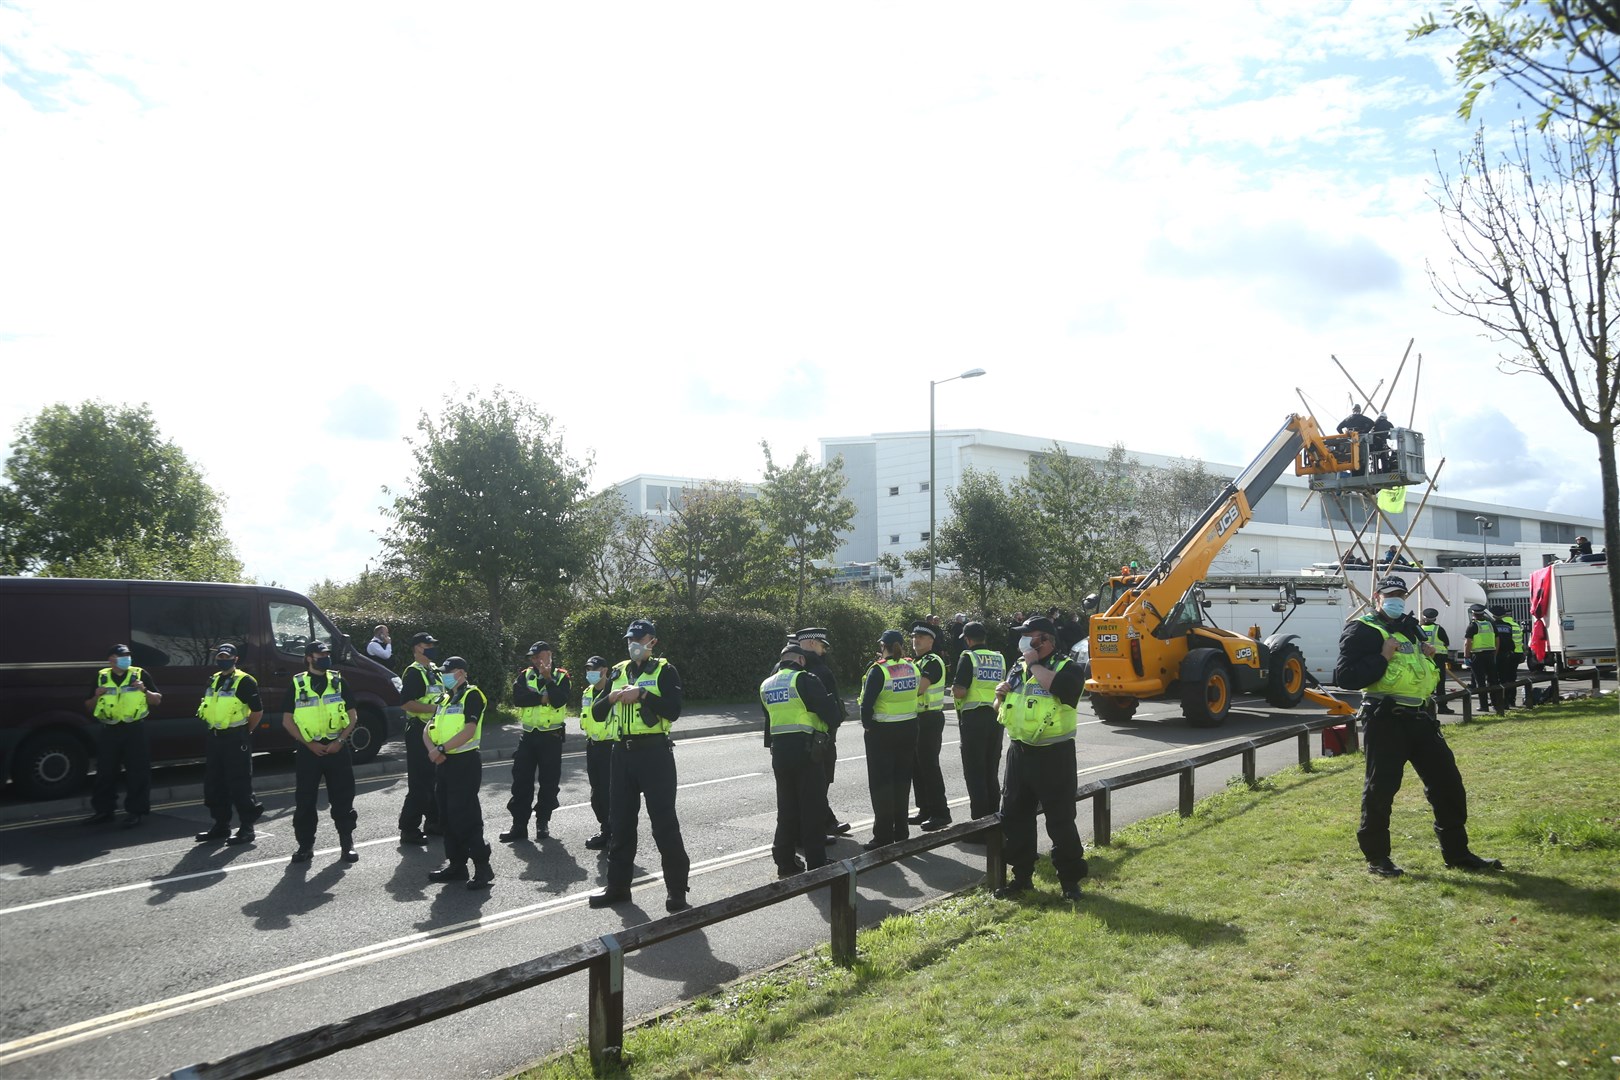 Police formed a cordon as emergency services used a cherry picker to remove protesters at Broxbourne, Hertfordshire (Yui Mok/PA)